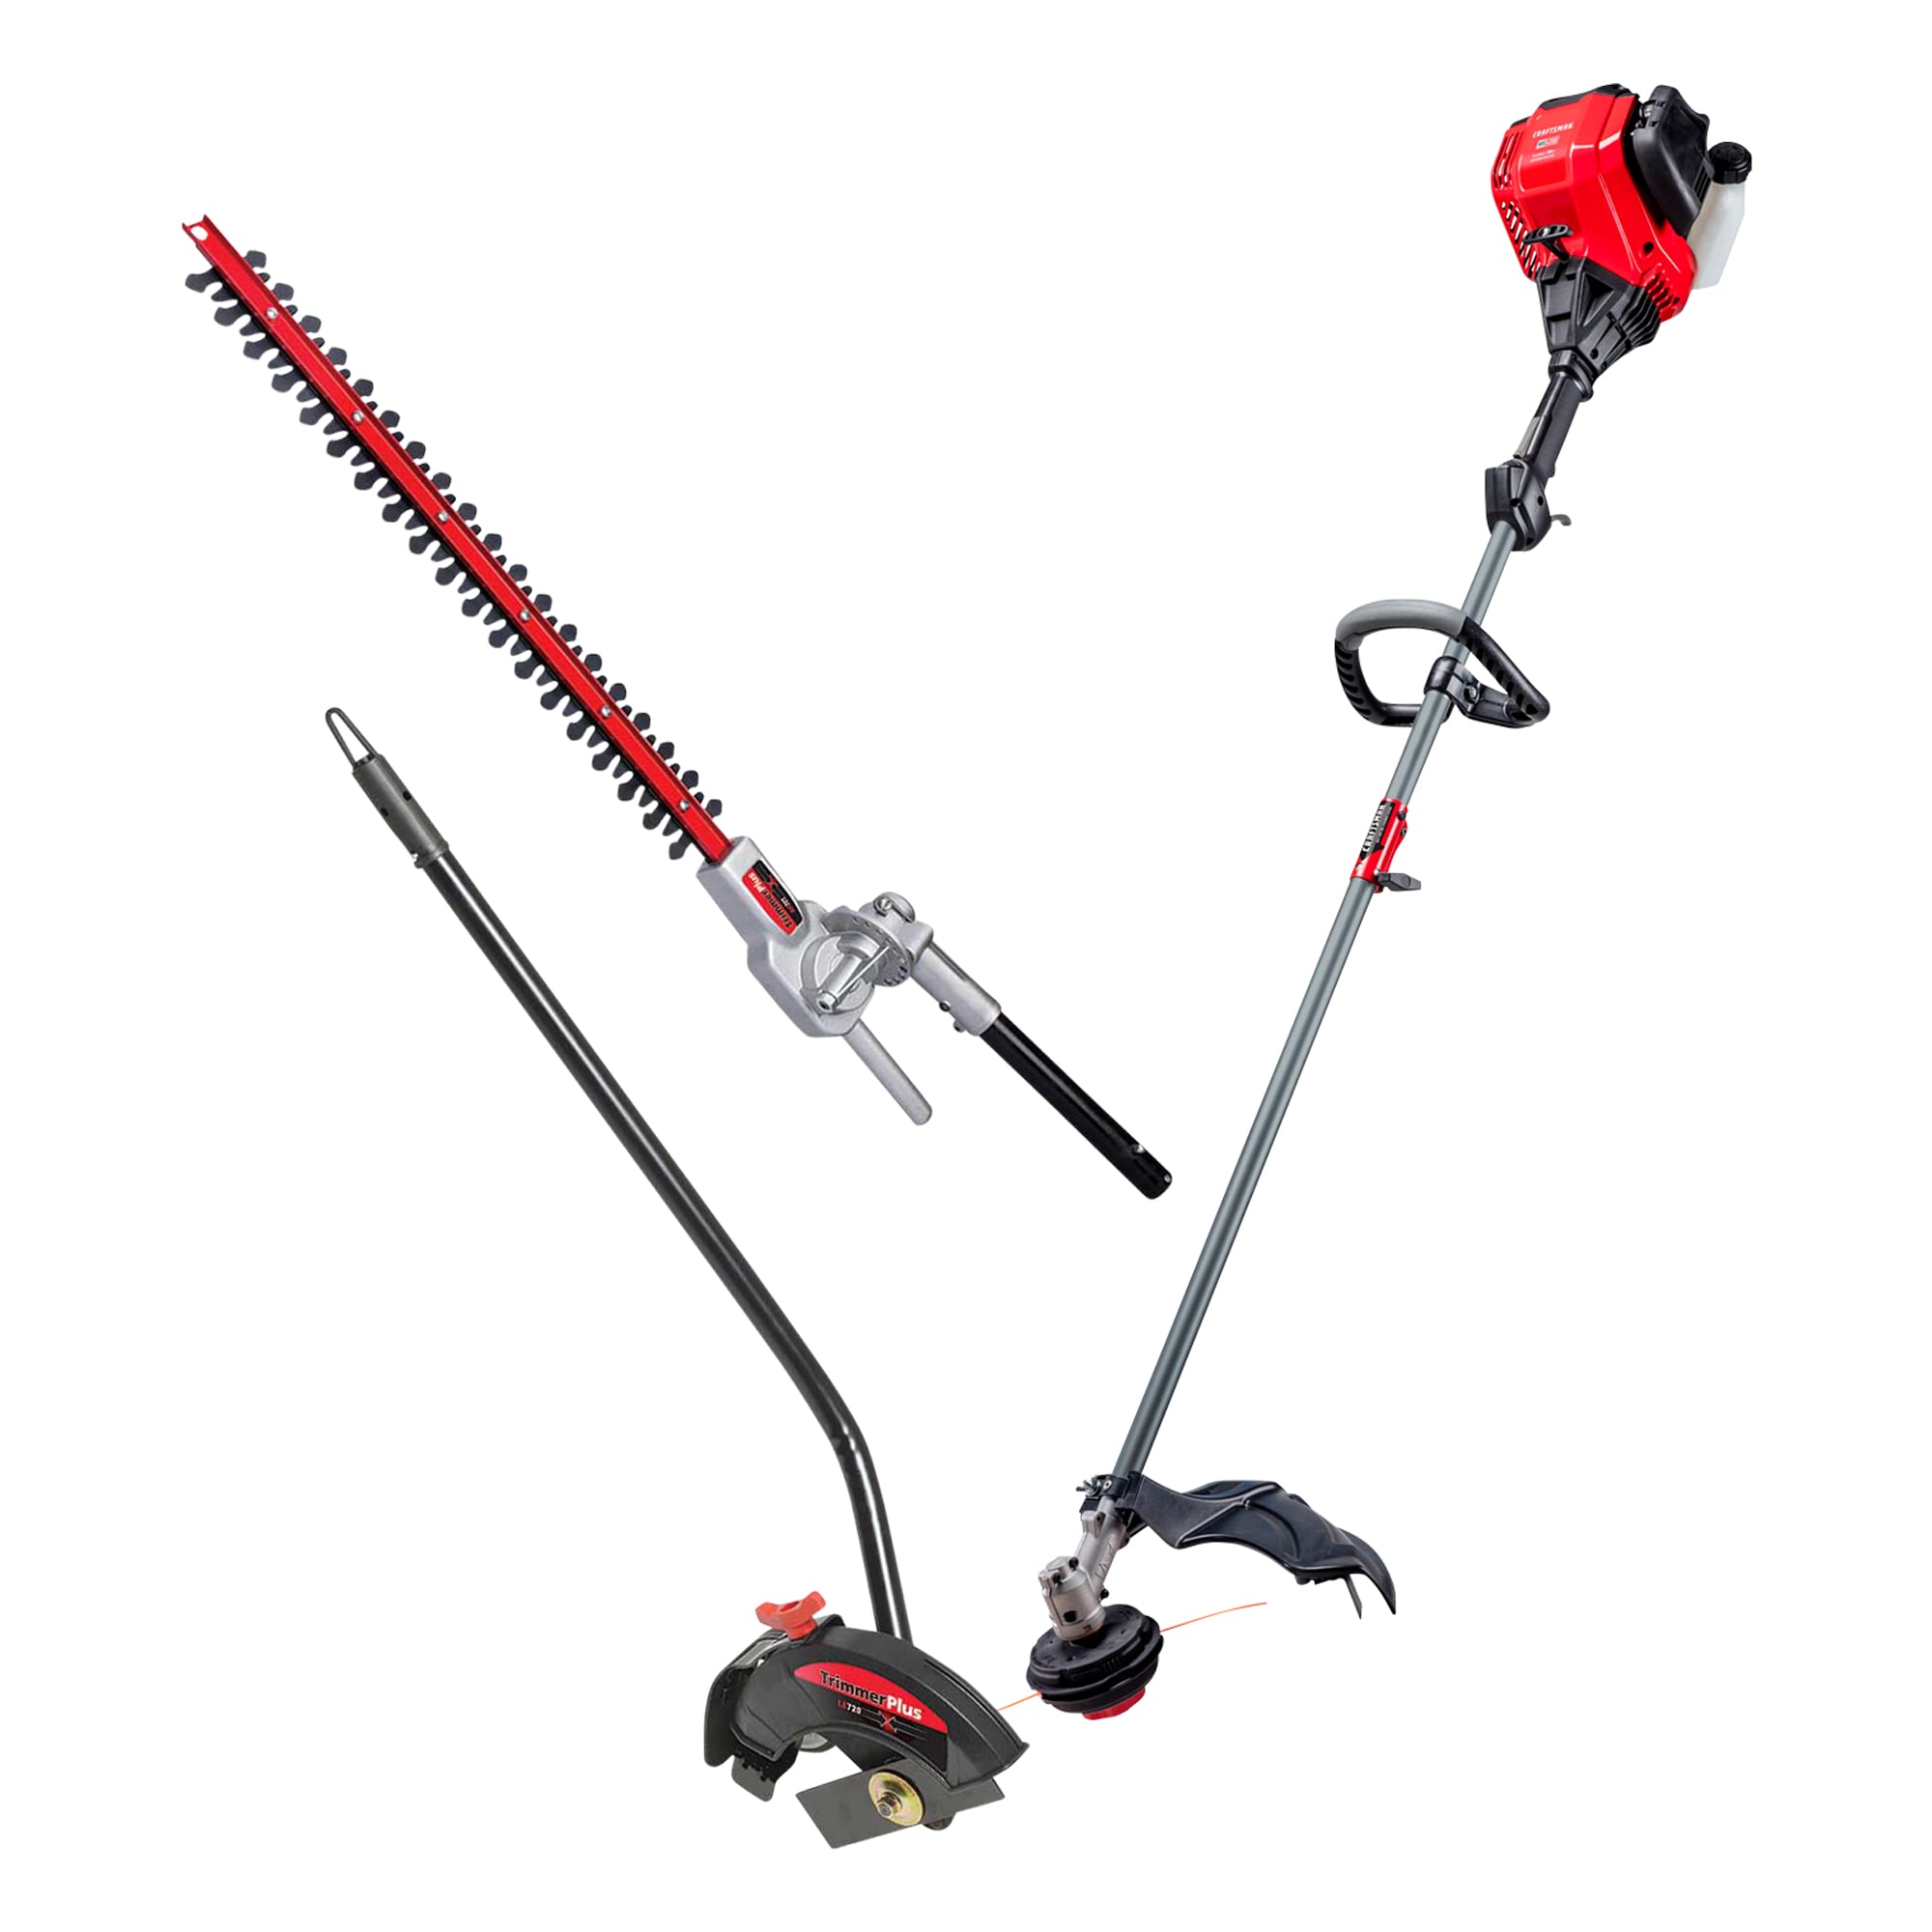 CRAFTSMAN 4-Cycle String Trimmer Combo | lupon.gov.ph